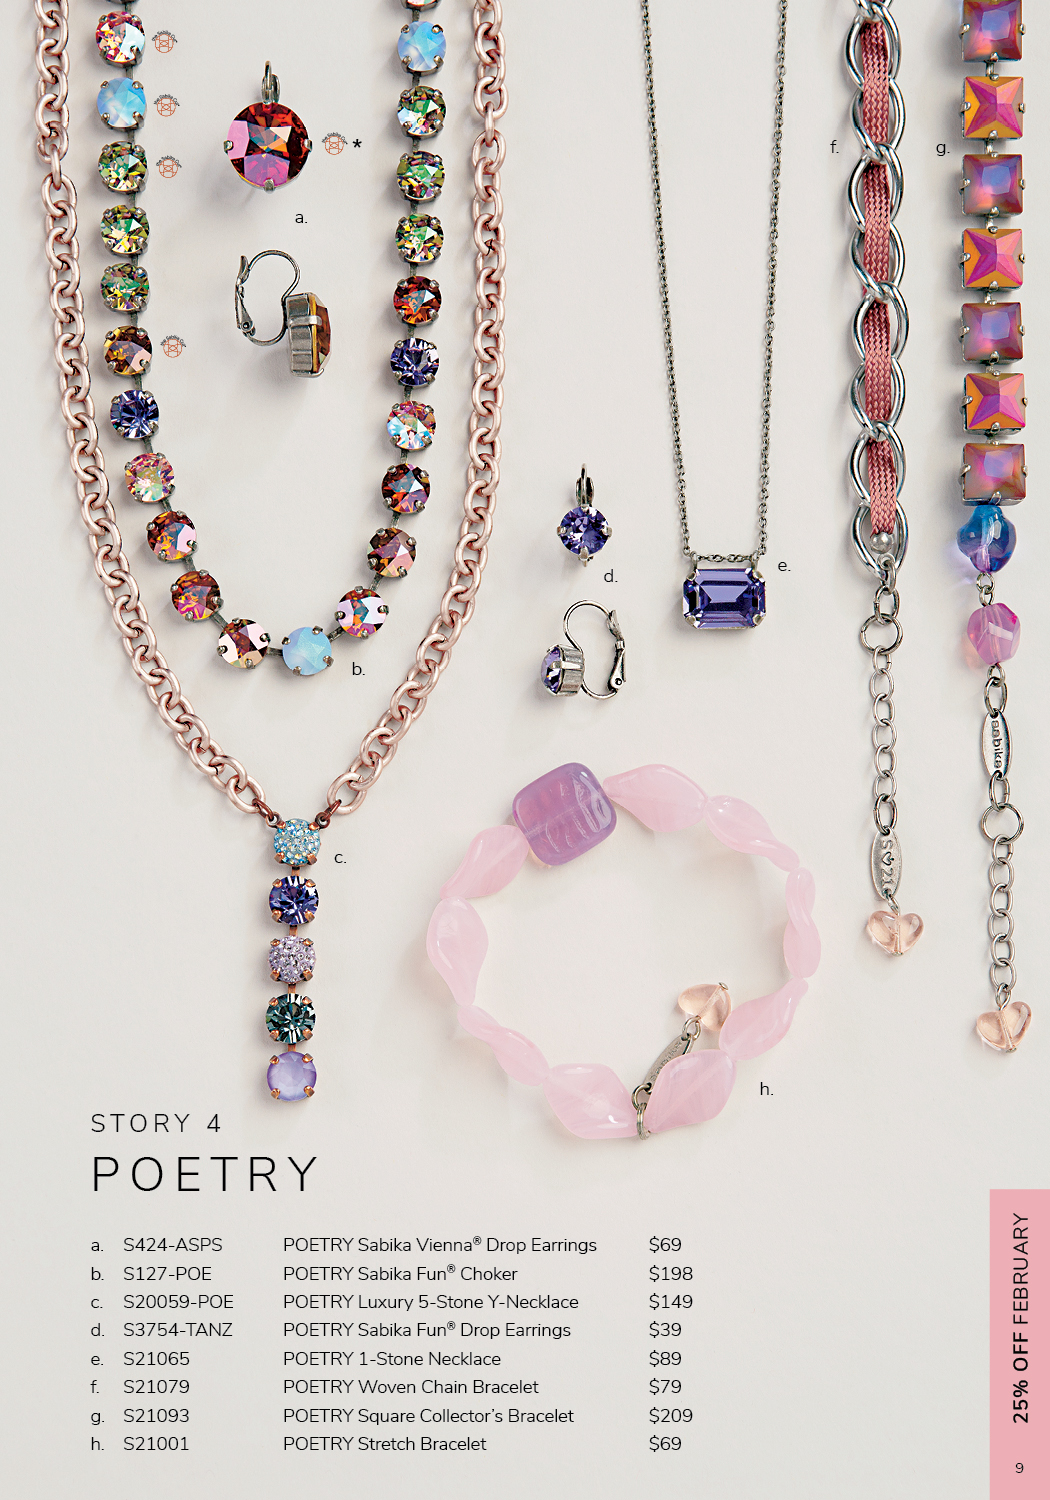 New Collectors item Details about   SABIKA JEWELRY Spring/Summer 2014 Catalog 